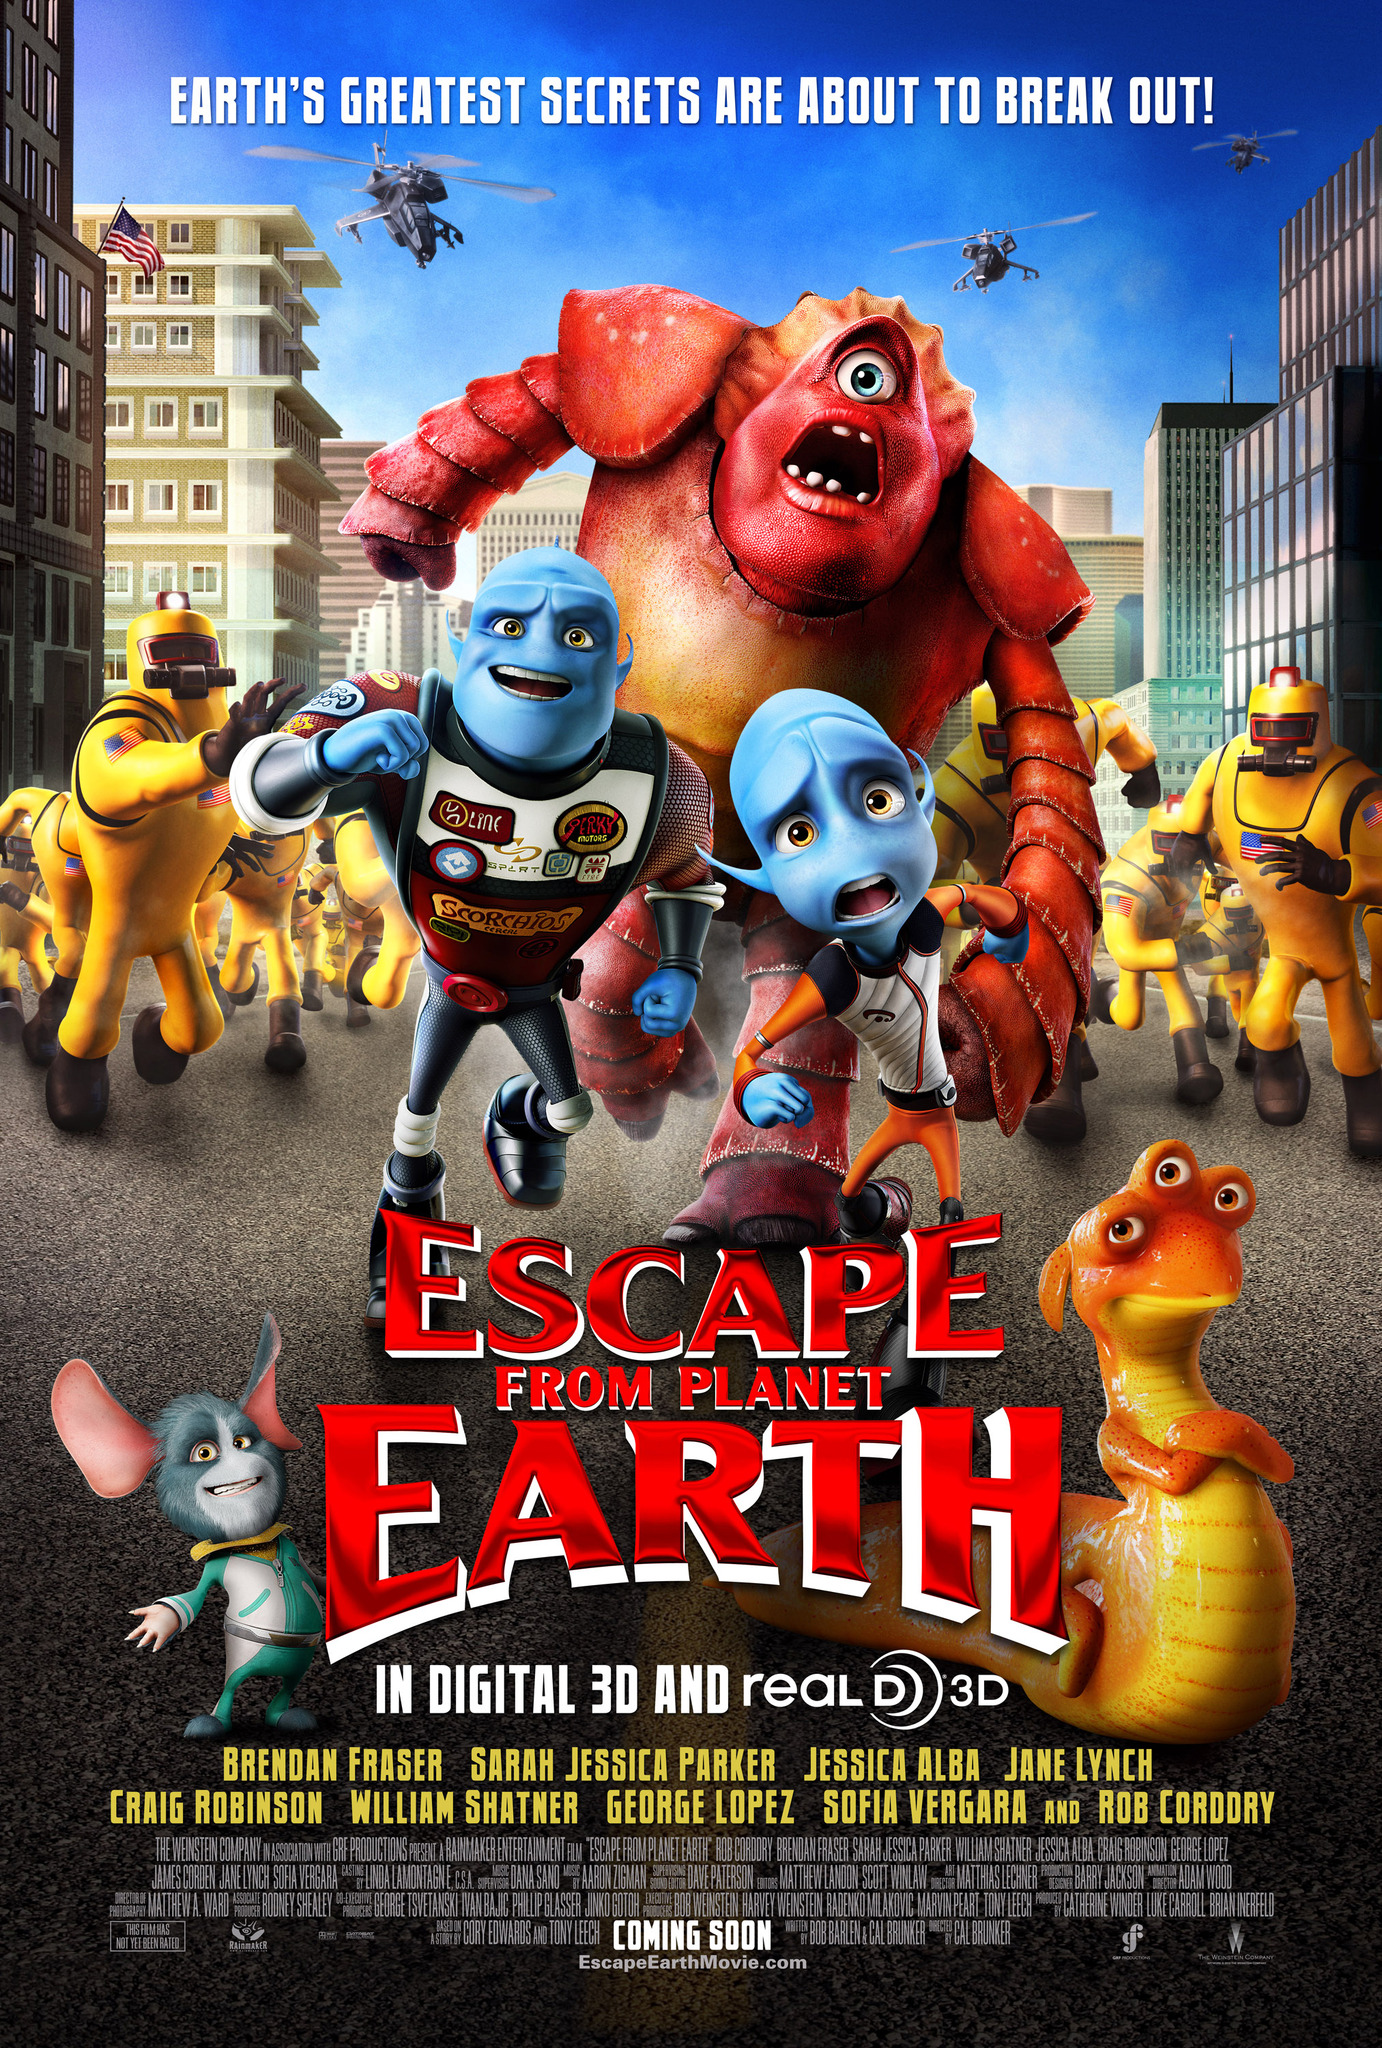 Escape From Planet Earth (2013) แก๊งเอเลี่ยน ป่วนหนีโลก Brendan Fraser